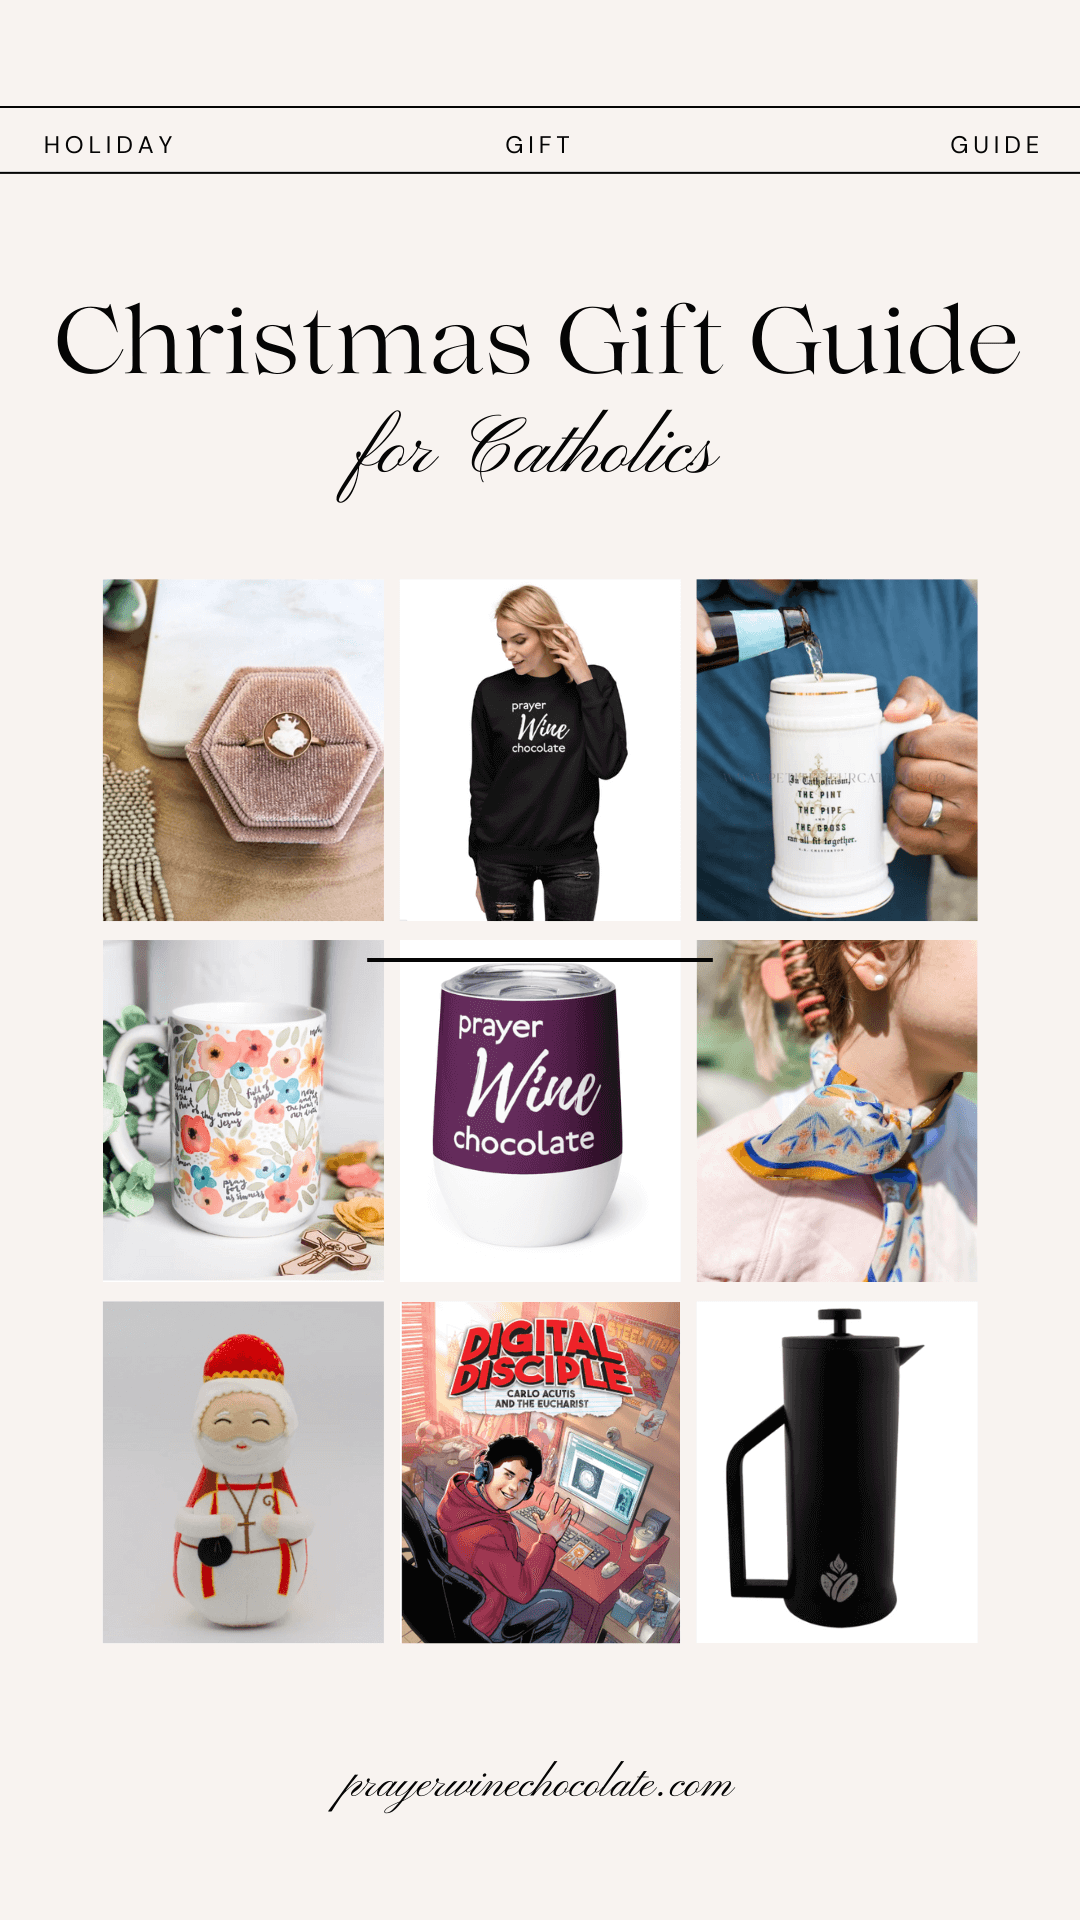 Gift collage - 9 pictures.
A Sacred Heart ring, a prayer wine chocolate sweatshirt, a beer stein mug, a coffee mug with flowers on it, a wine tumbler that says prayer wine chocolate, a silk scarf, a plush Saint Nick toy, a comic book and a French press